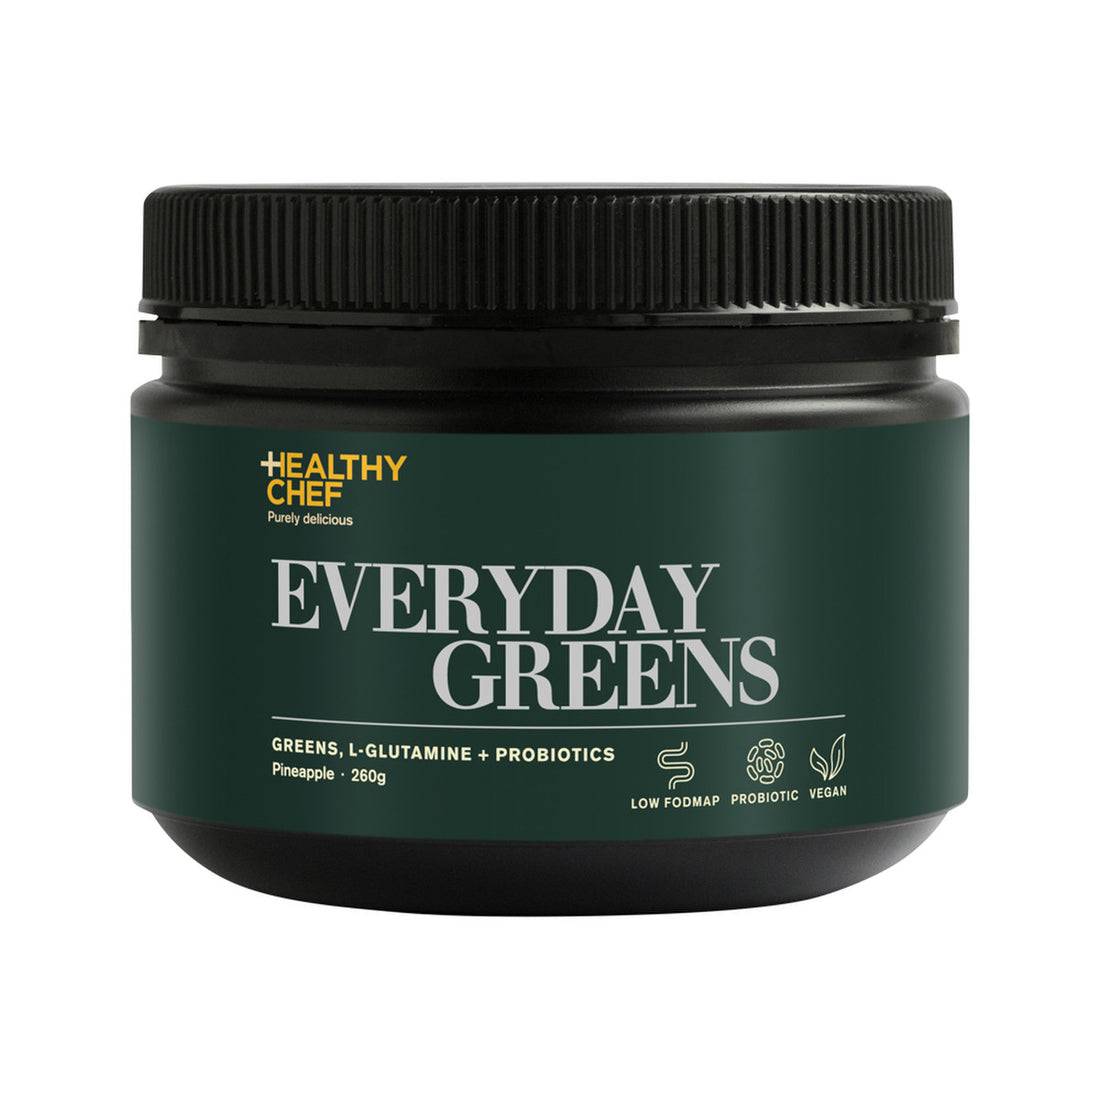 The Healthy Chef Everyday Greens Pineapple 260g